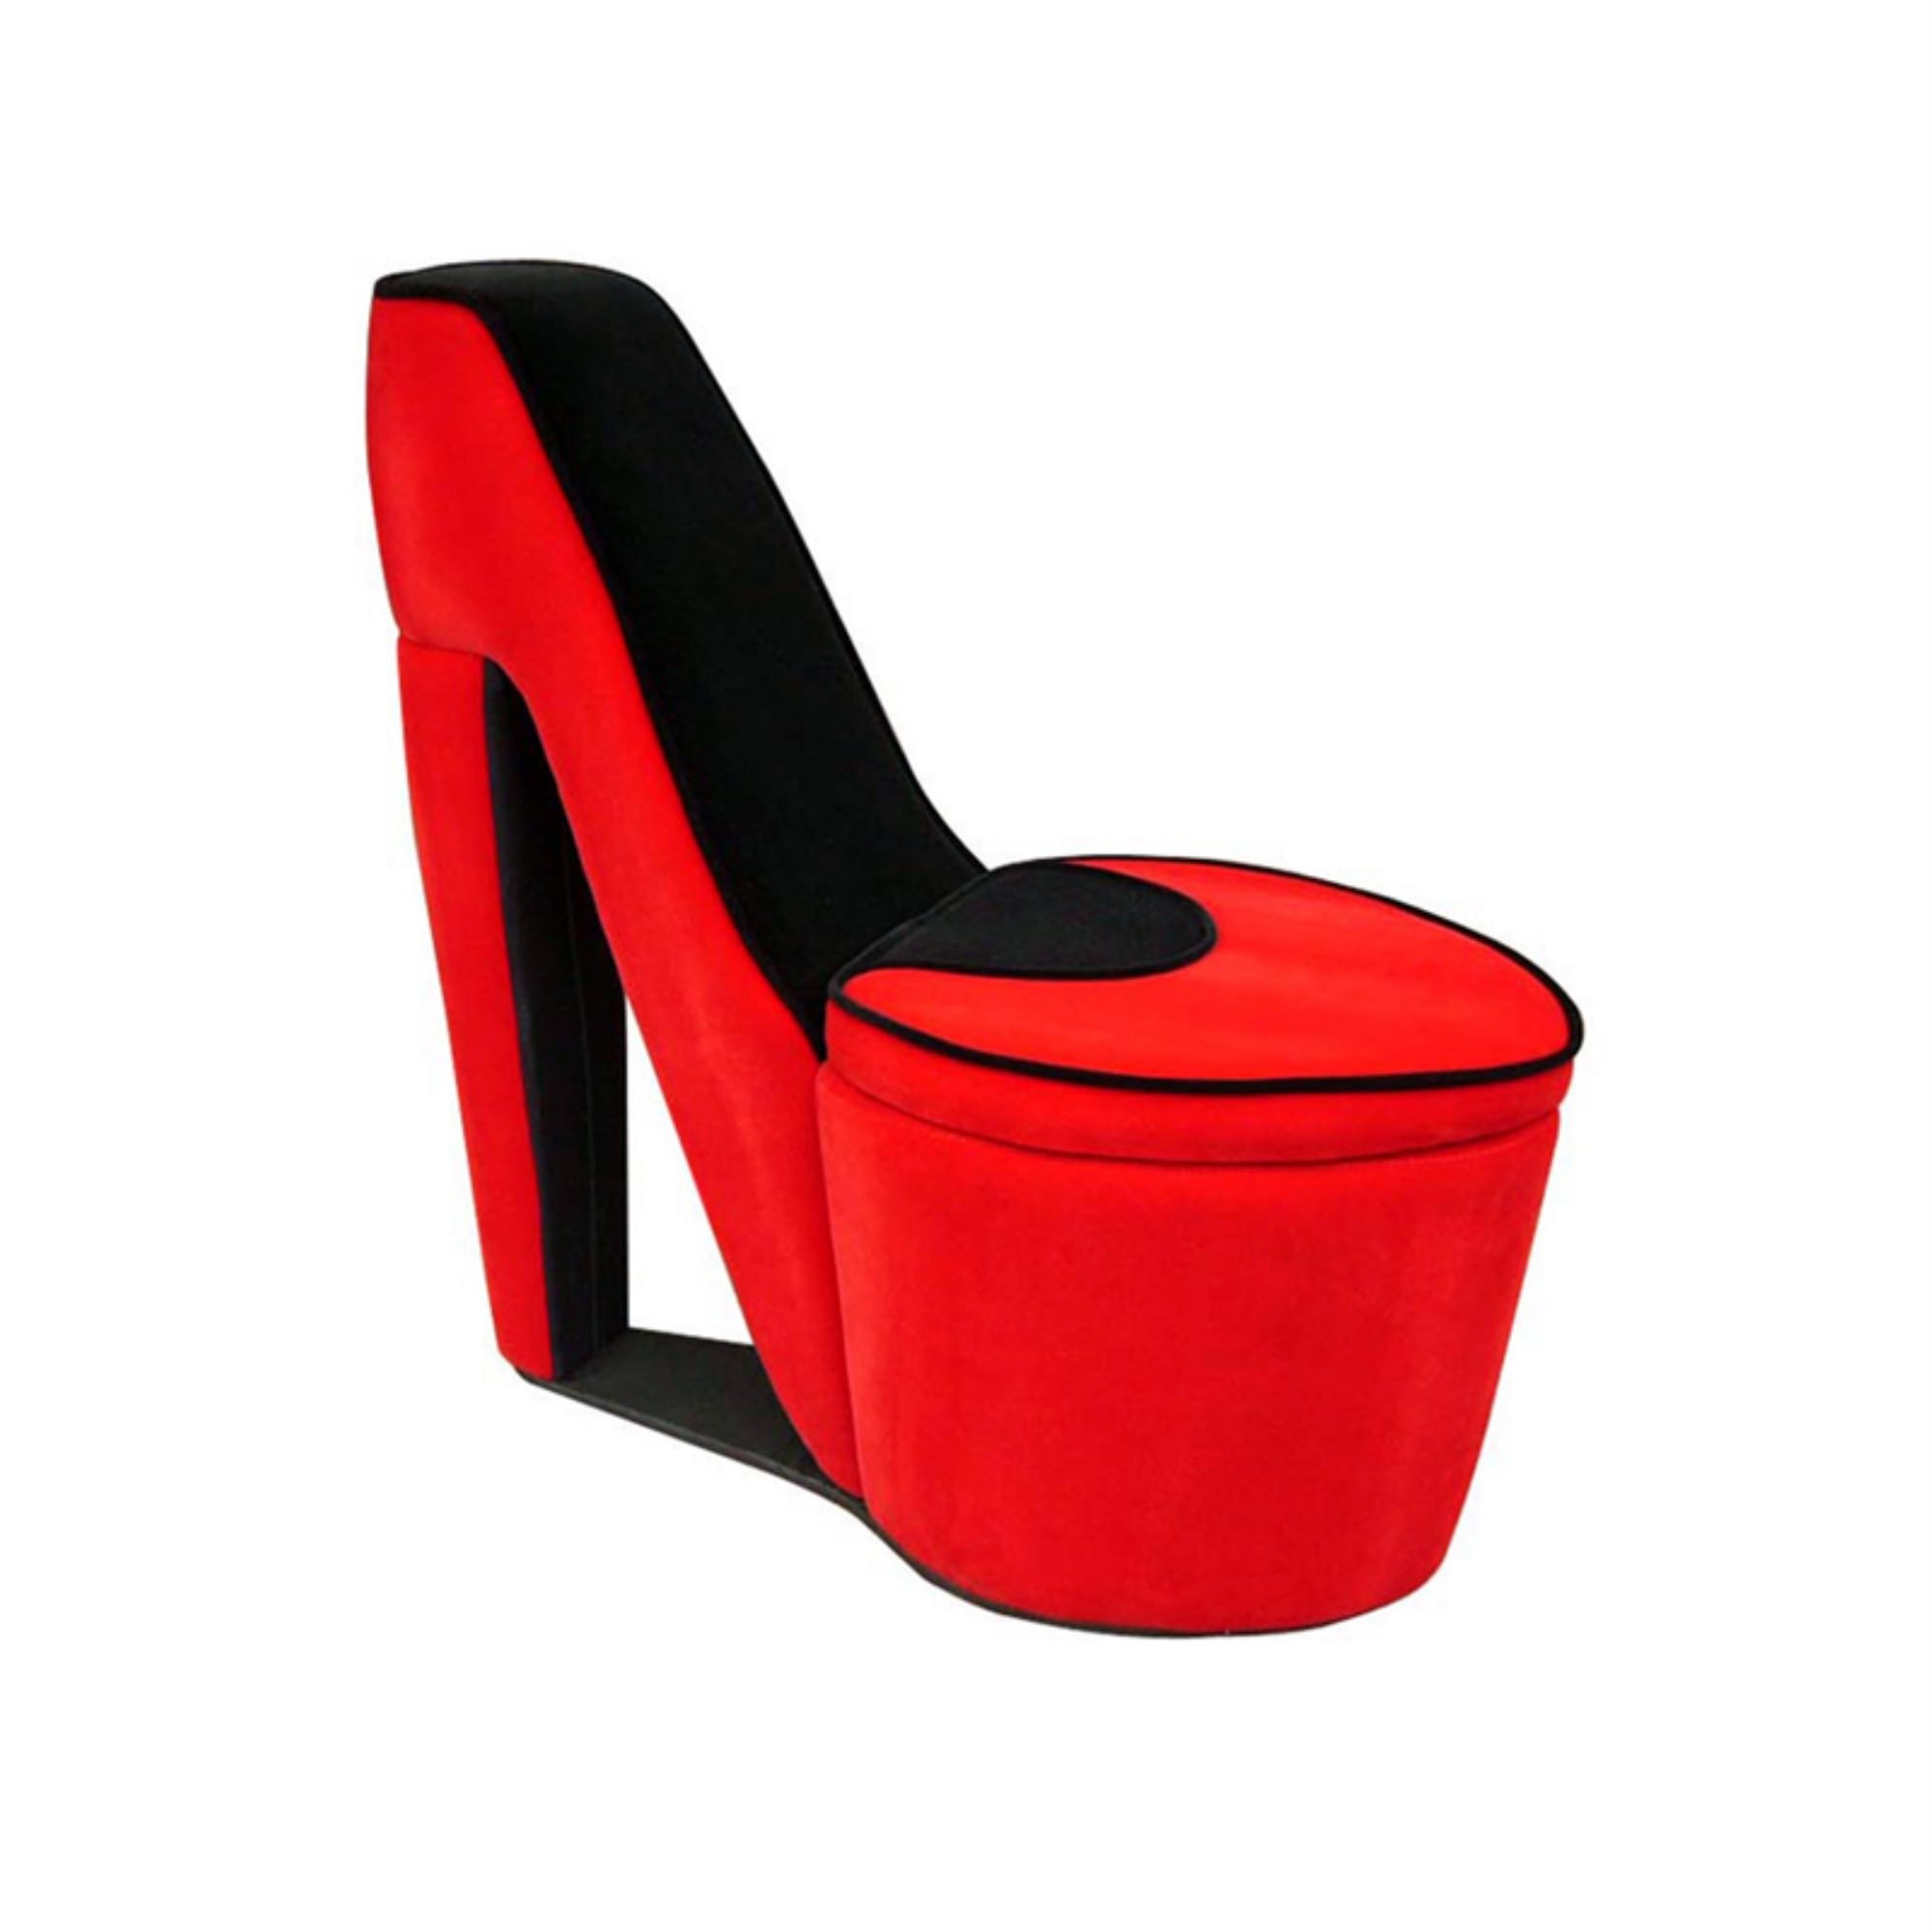 High Heel Shaped Wooden Chair With Storage